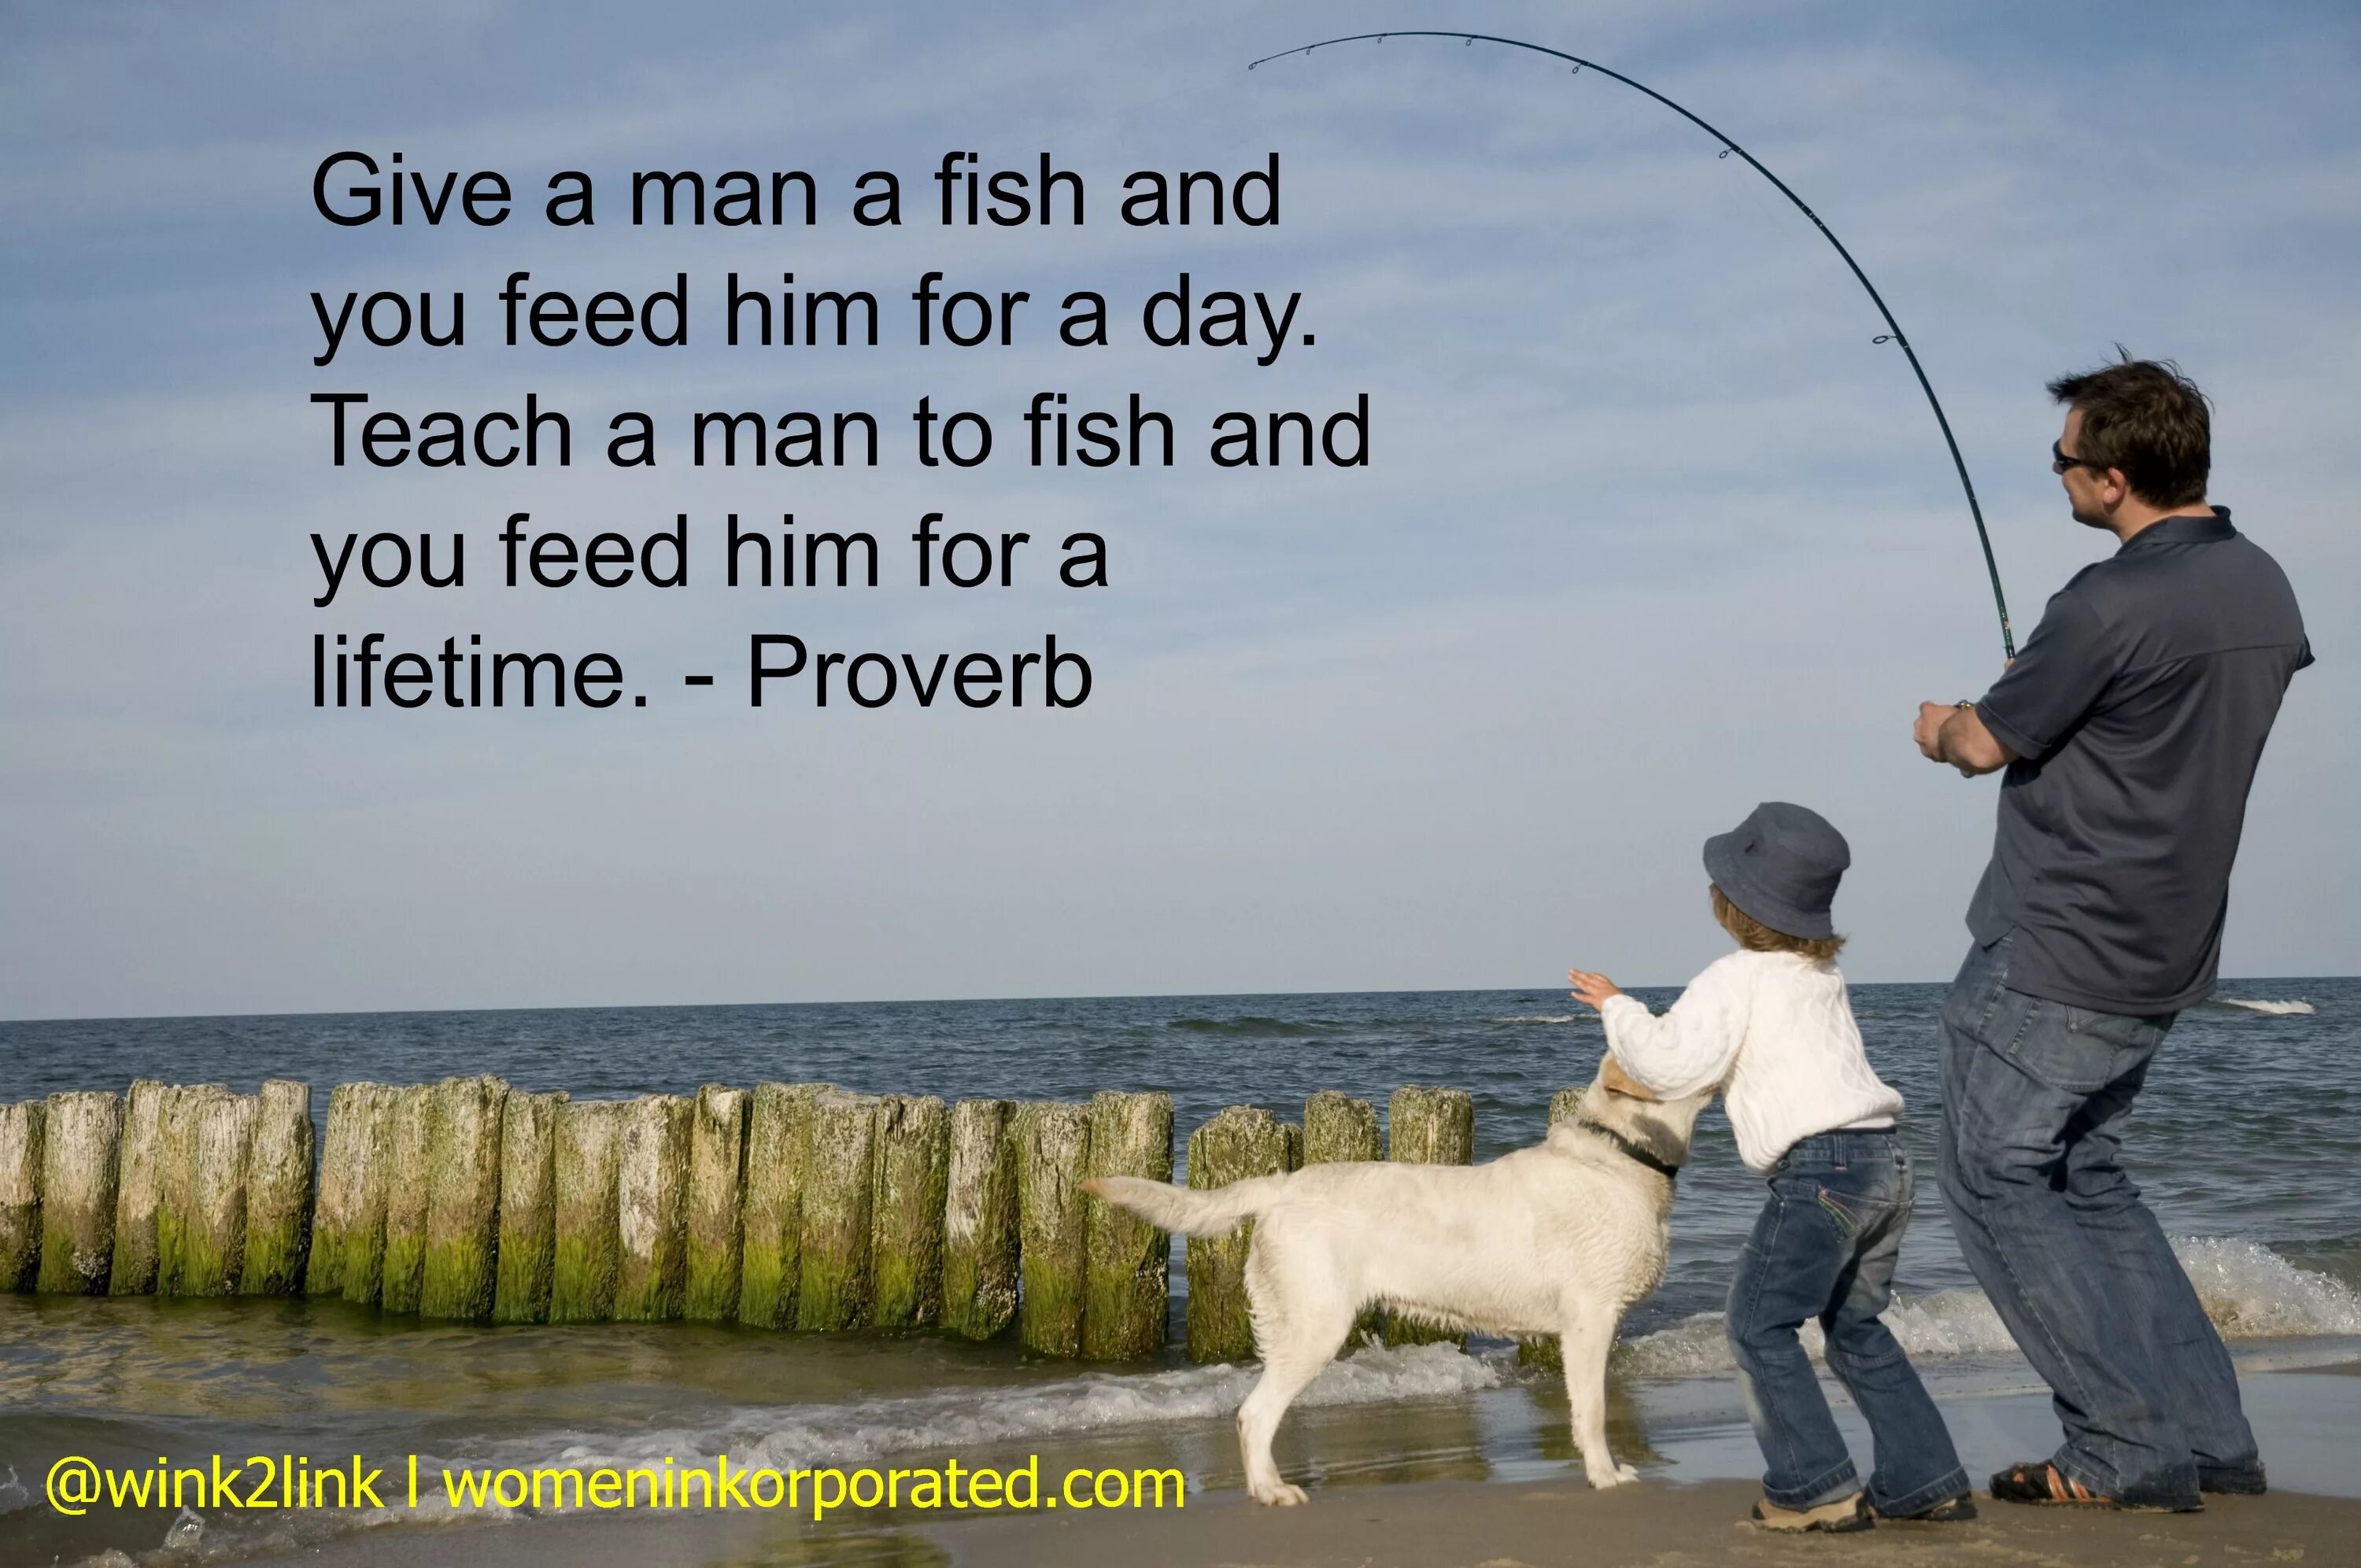 I like to be a fish. Give a man a Fish and you Feed him for a Day; teach a man to Fish and you Feed him for a Lifetime. Teach a man to Fish. You Day man a man Lifetime teach a for you Feed. If you teach how to Fish.